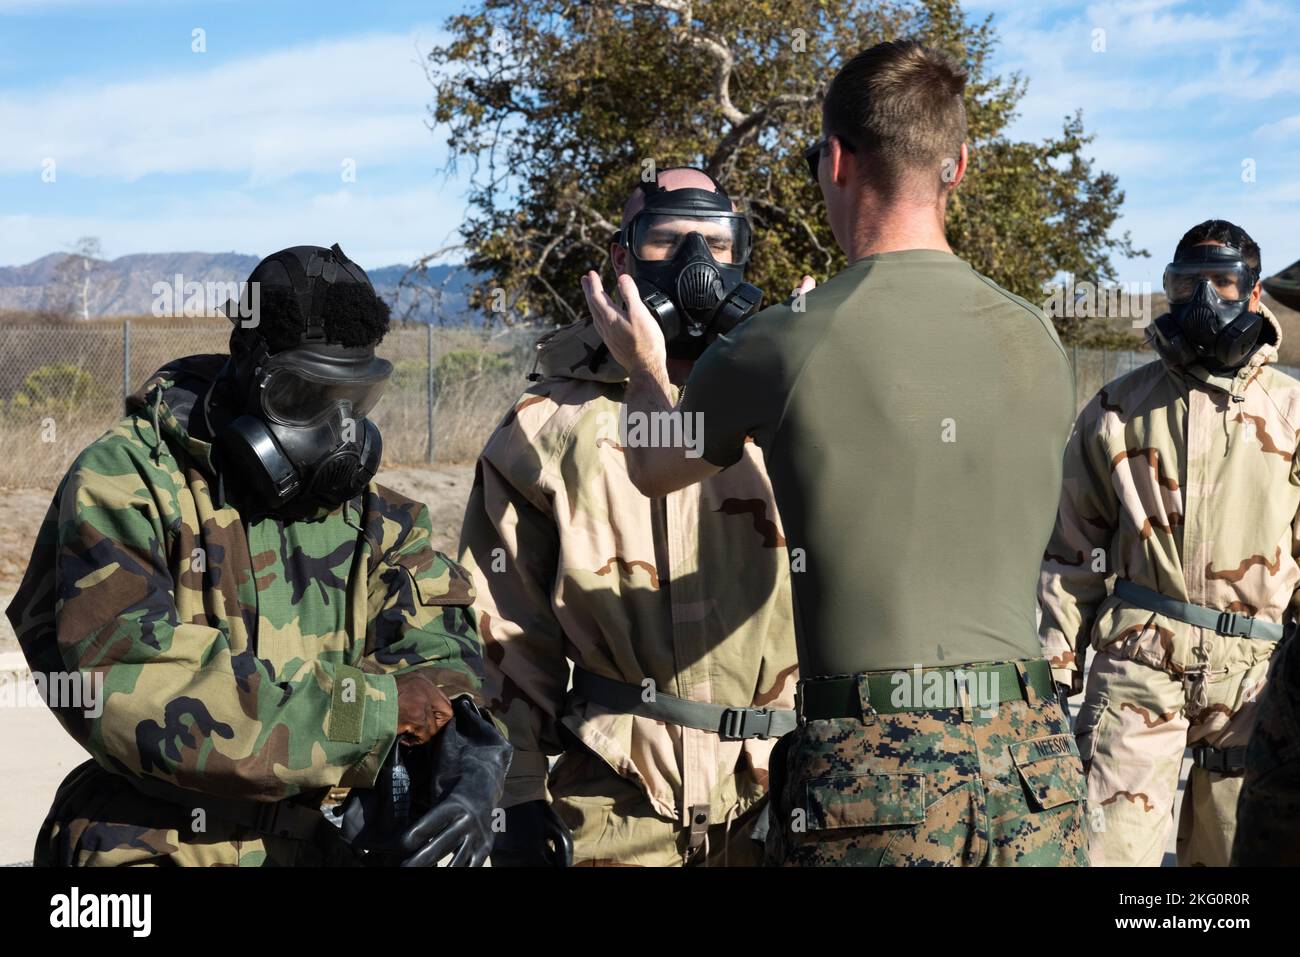 U.S. Marine Cpl. Brendan F. Neeson, a chemical, biological, radiological and nuclear defense specialist with I Marine Expeditionary Force, checks Marines’ M50 gas masks during CBRN training at Marine Corps Base Camp Pendleton, California, Oct. 20, 2022. CBRN training is conducted annually to ensure Marines know how to use their protective gear in the event of a chemical attack. Stock Photo